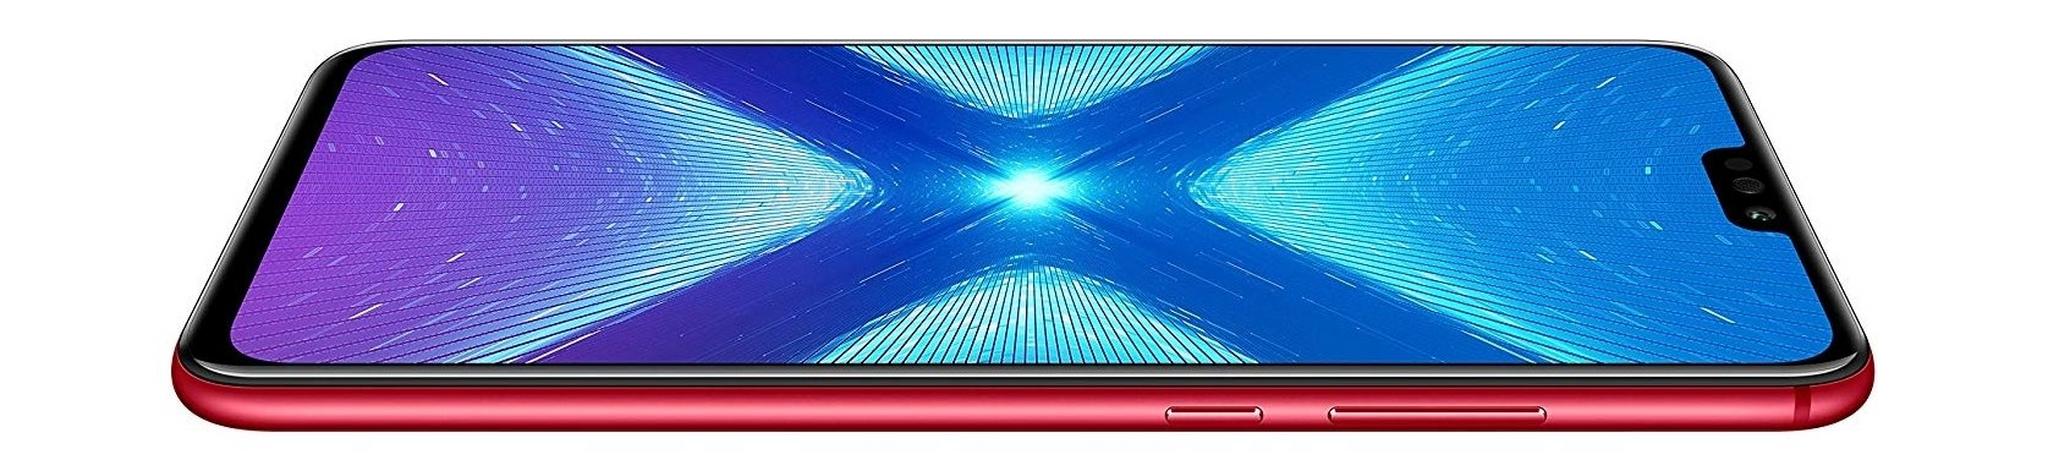 HONOR 8X 128GB Phone - Red